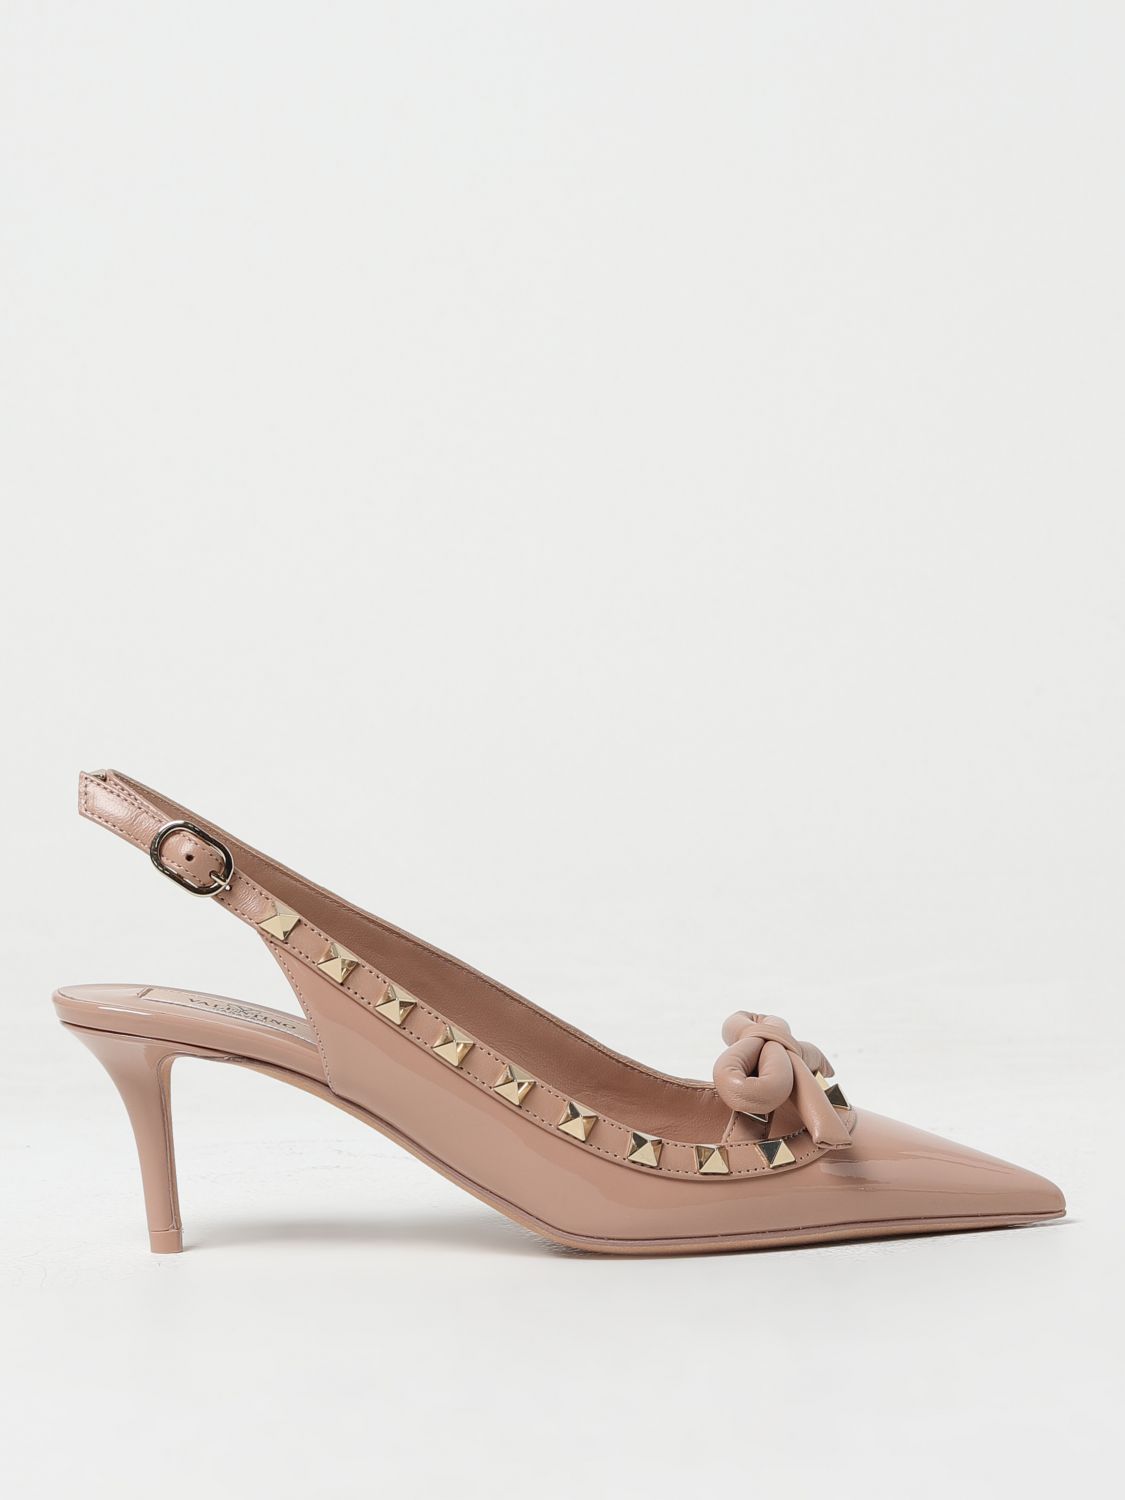 Valentino Garavani Rockstud Slingback In Patent Leather With Studs In Pink